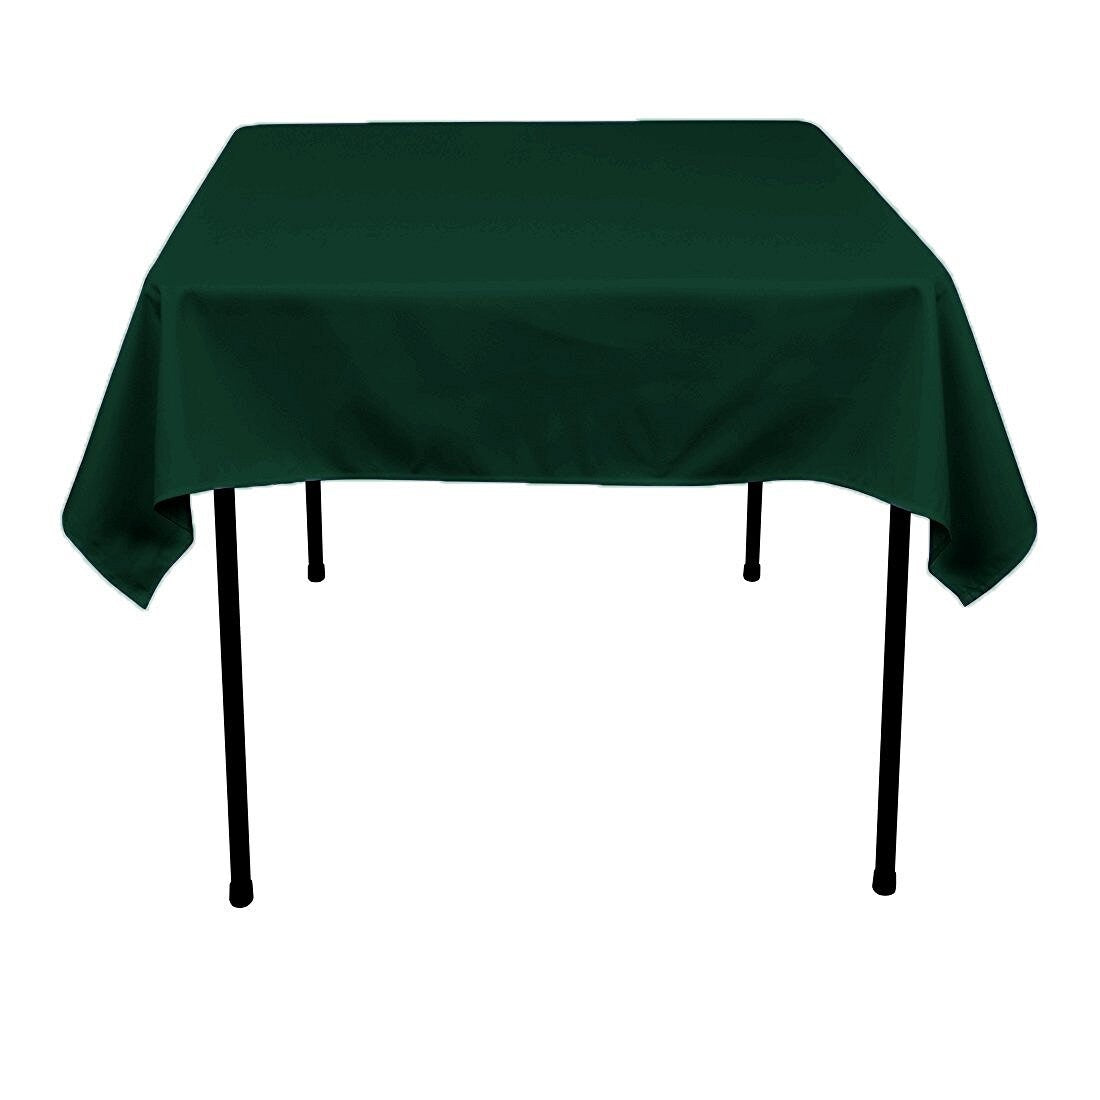 54 x 54-Inch Seamless Hunter Green Rectangular Polyester Tablecloth for Wedding Party Decorations Square Table Cloth Cover